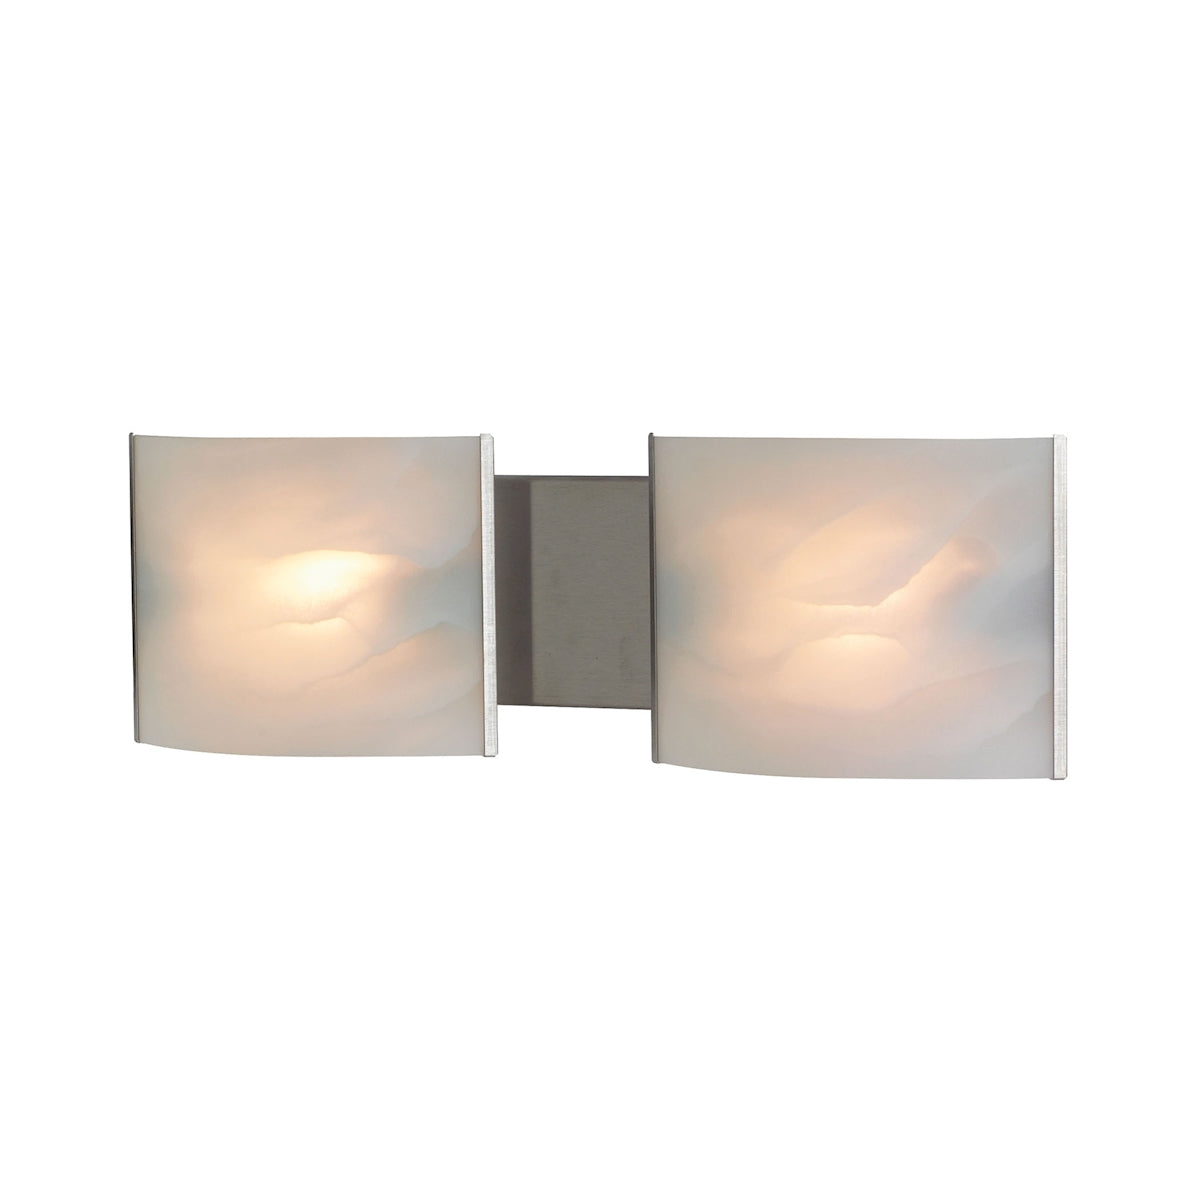 ELK Lighting BV712-6-16 Pannelli 2-Light Vanity Sconce in Stainless Steel with Hand-formed White Alabaster Glass